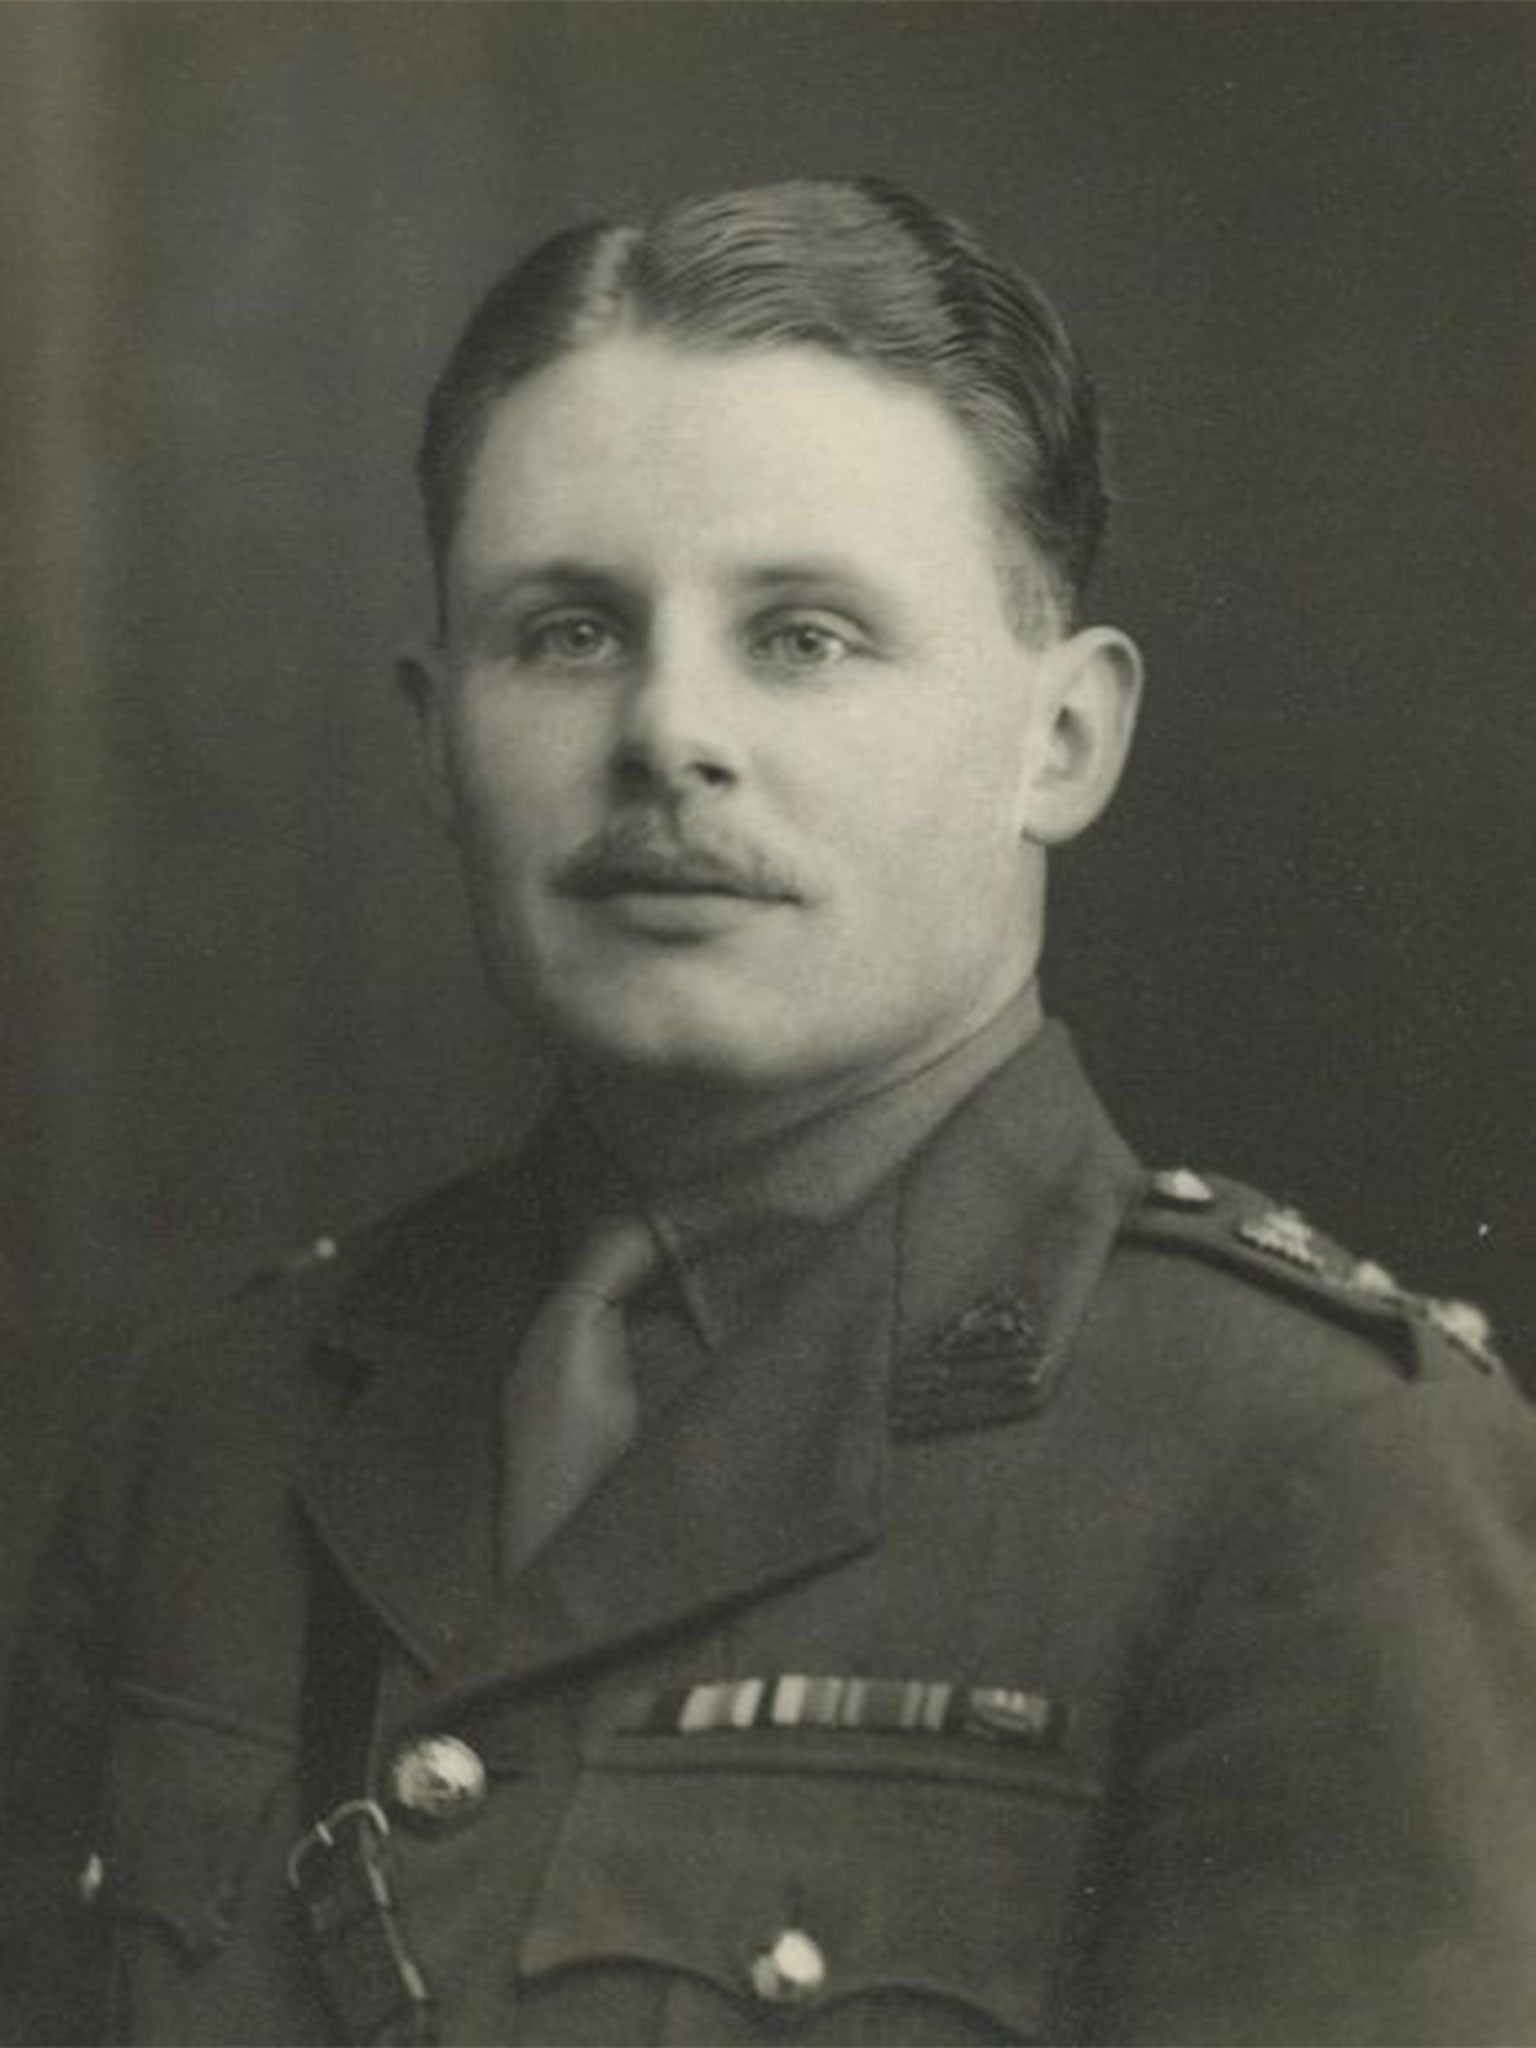 Pardoe in 1951,after the war he served in Burma and the Middle East, then trained Territorial Army personnel